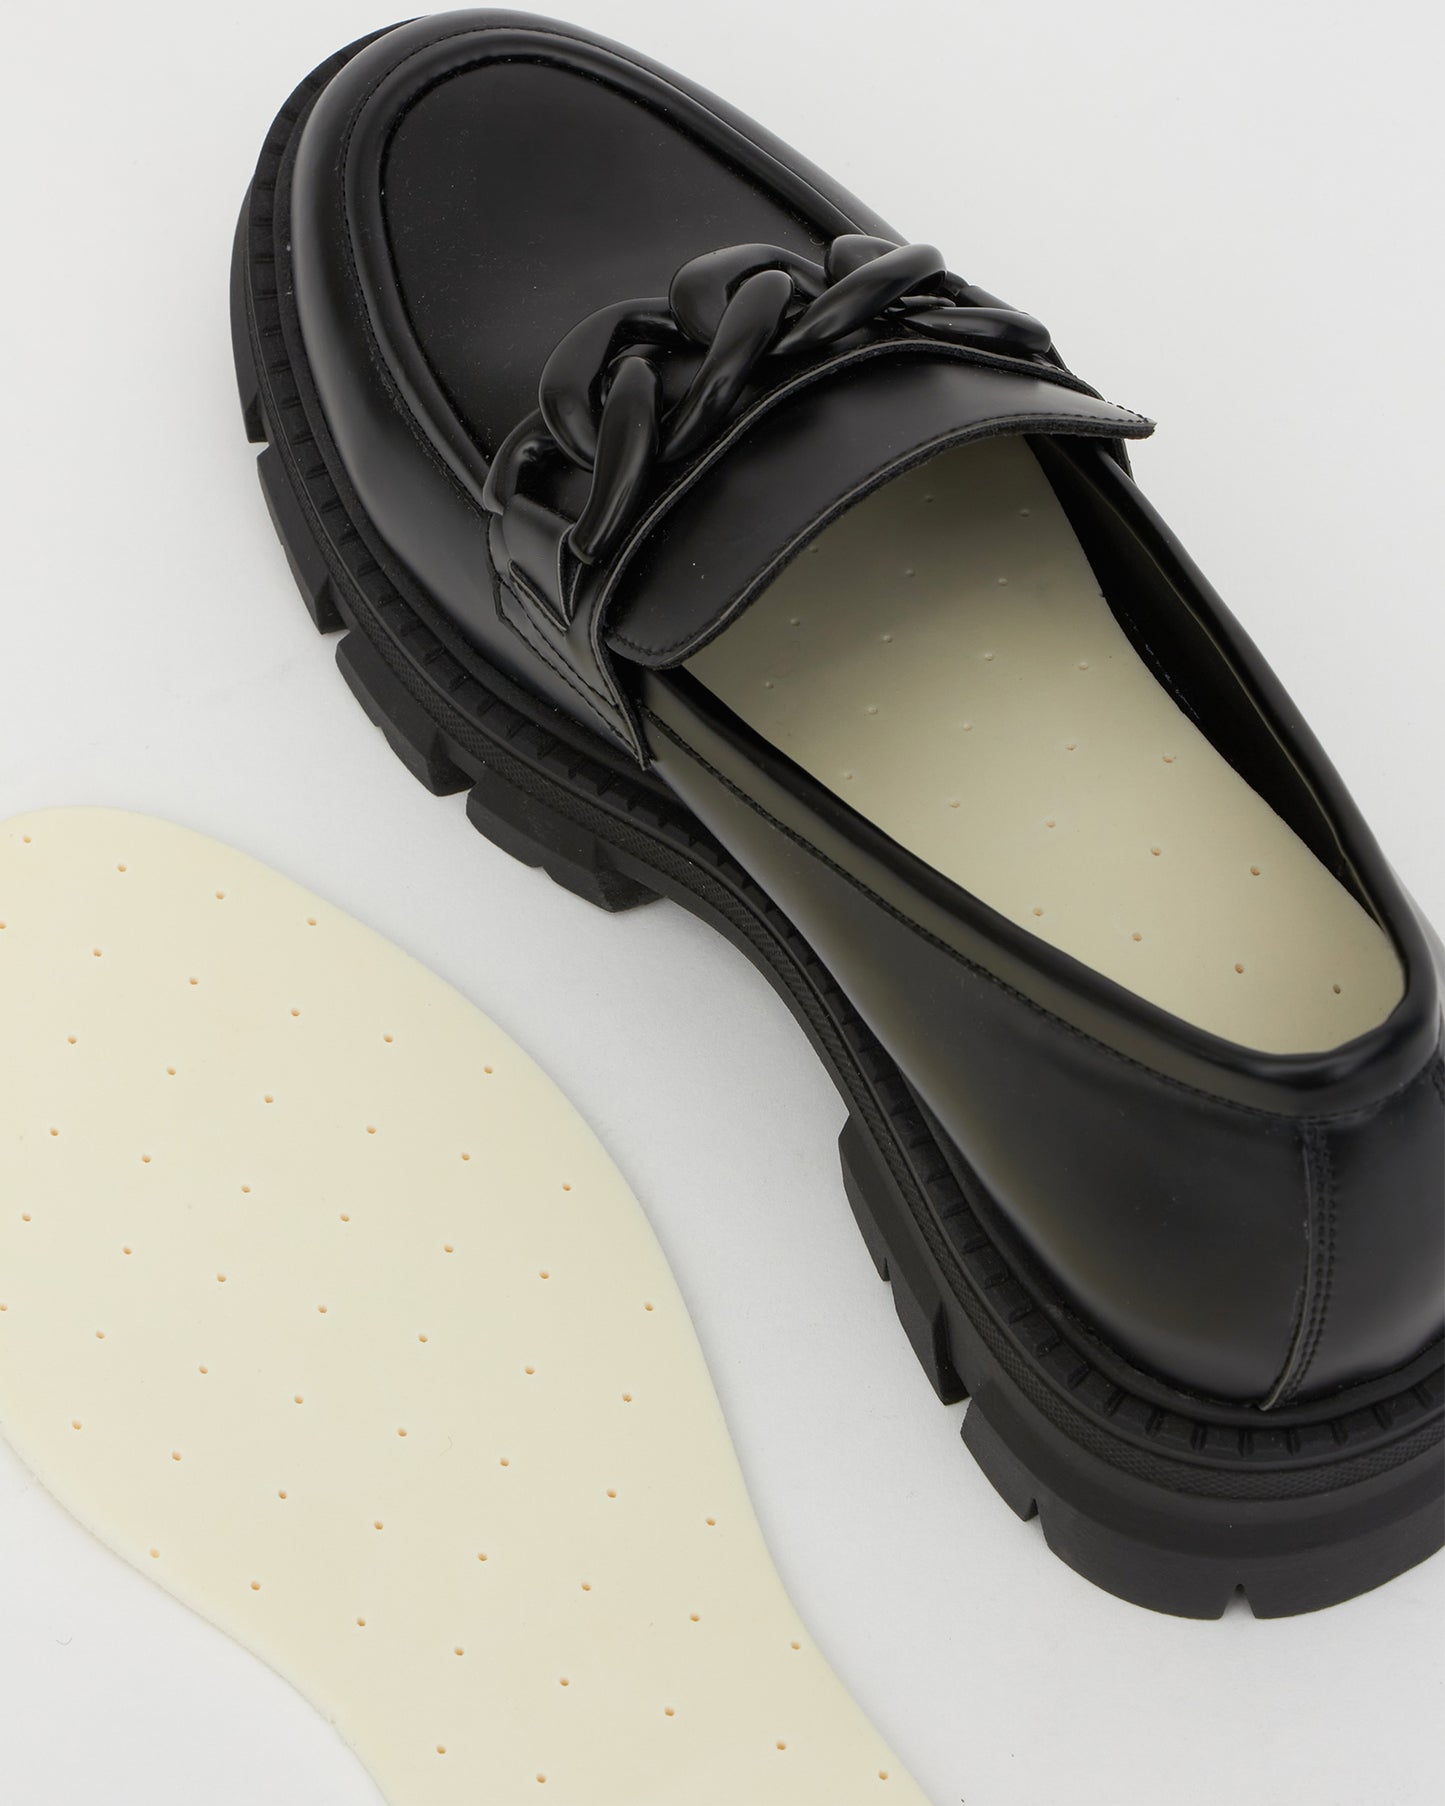 INNER S LADIES SMALL INSOLE